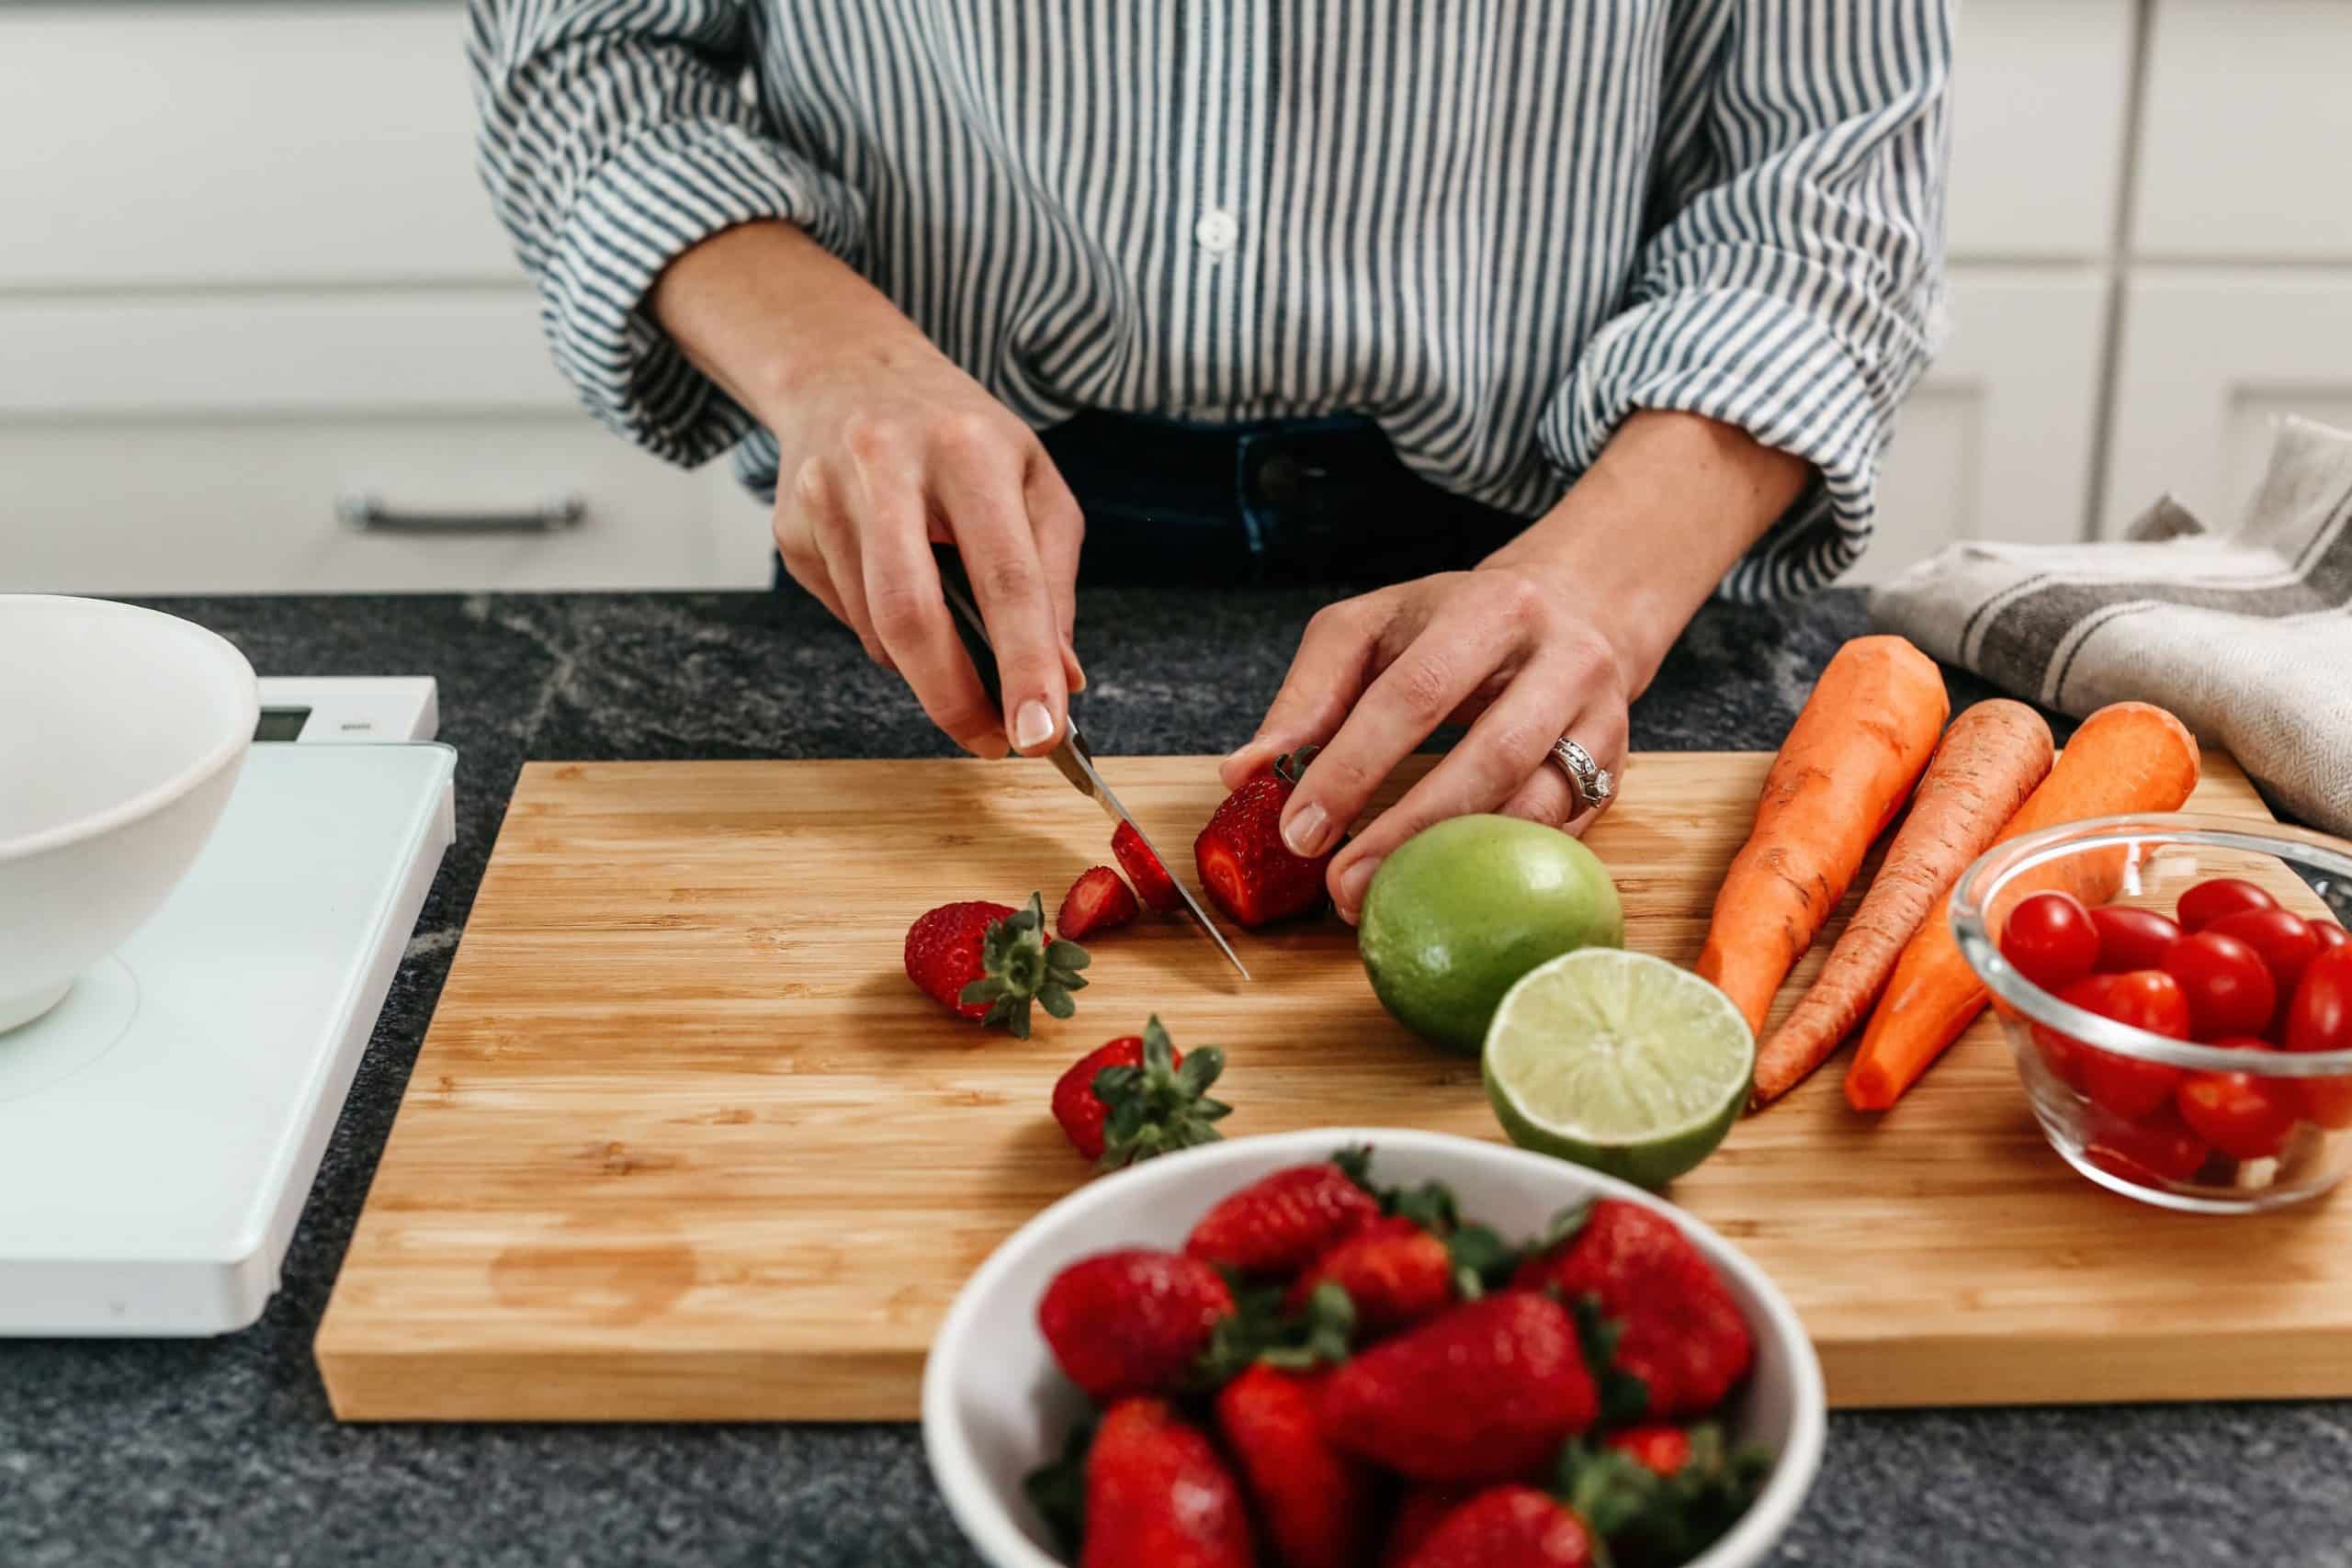 Person cutting strawberries on cutting board with other vegetables and fruit